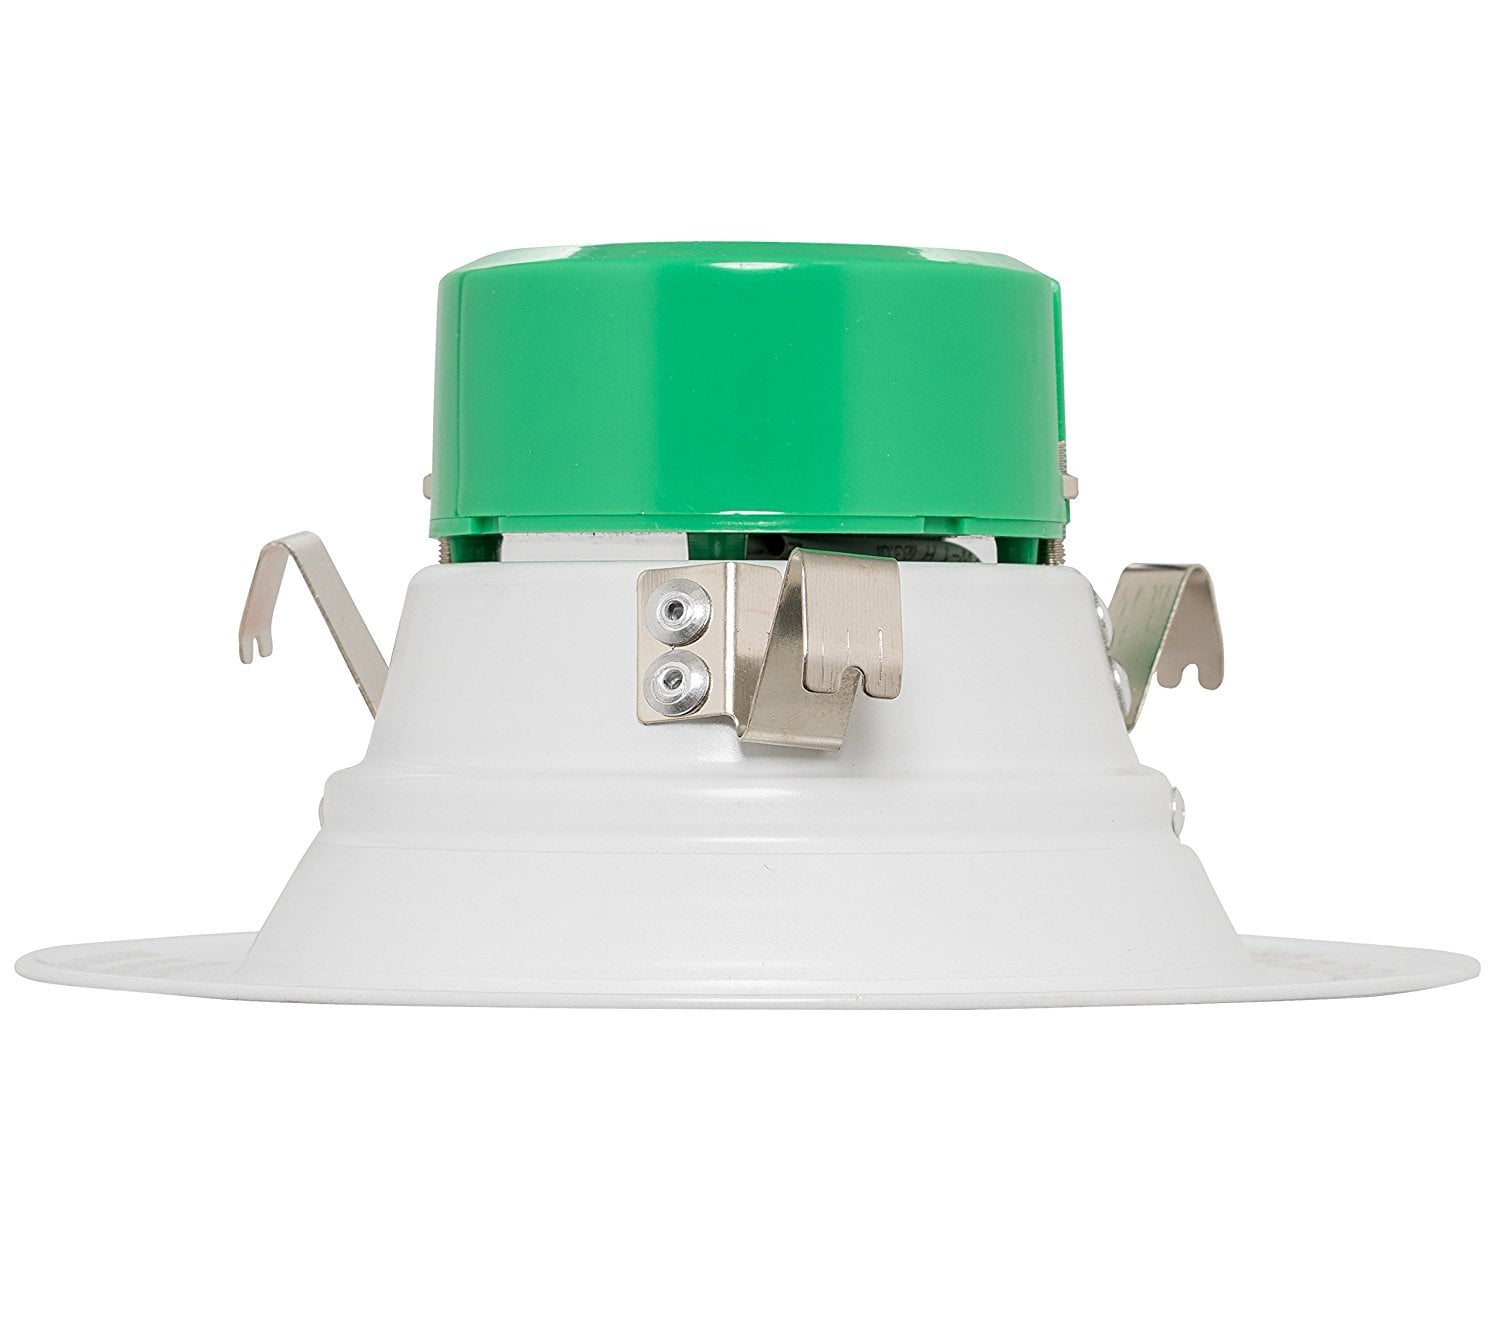 Westgate LED Retrofit Recessed Downlight 10W 4 Inch With Integrated Baffle Trim 